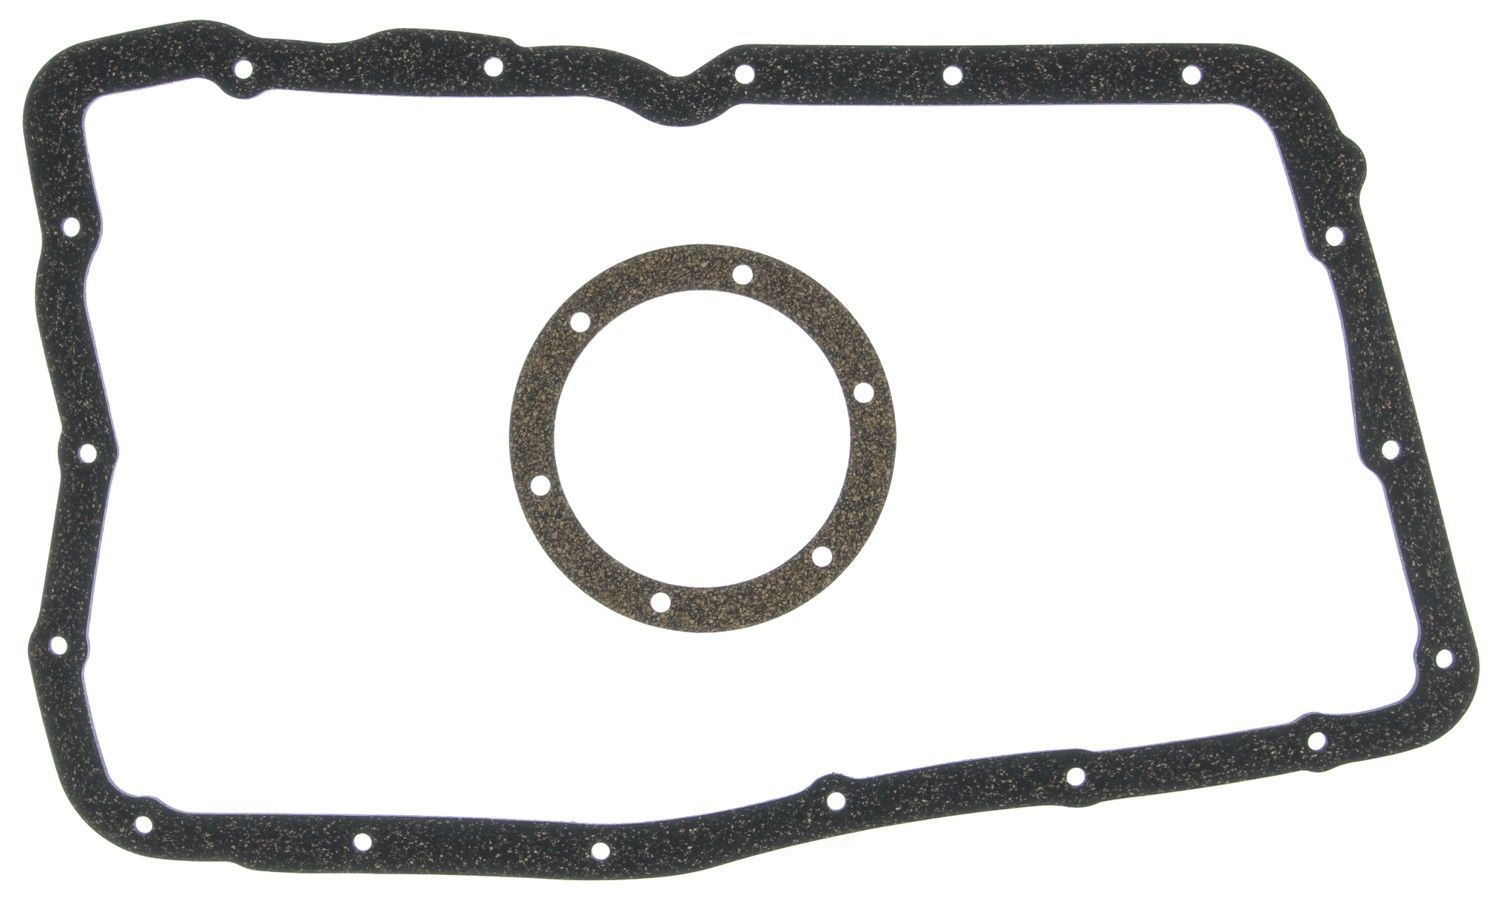 MAHLE ORIGINAL - Automatic Transmission Valve Body Cover Gasket - MHL W32953